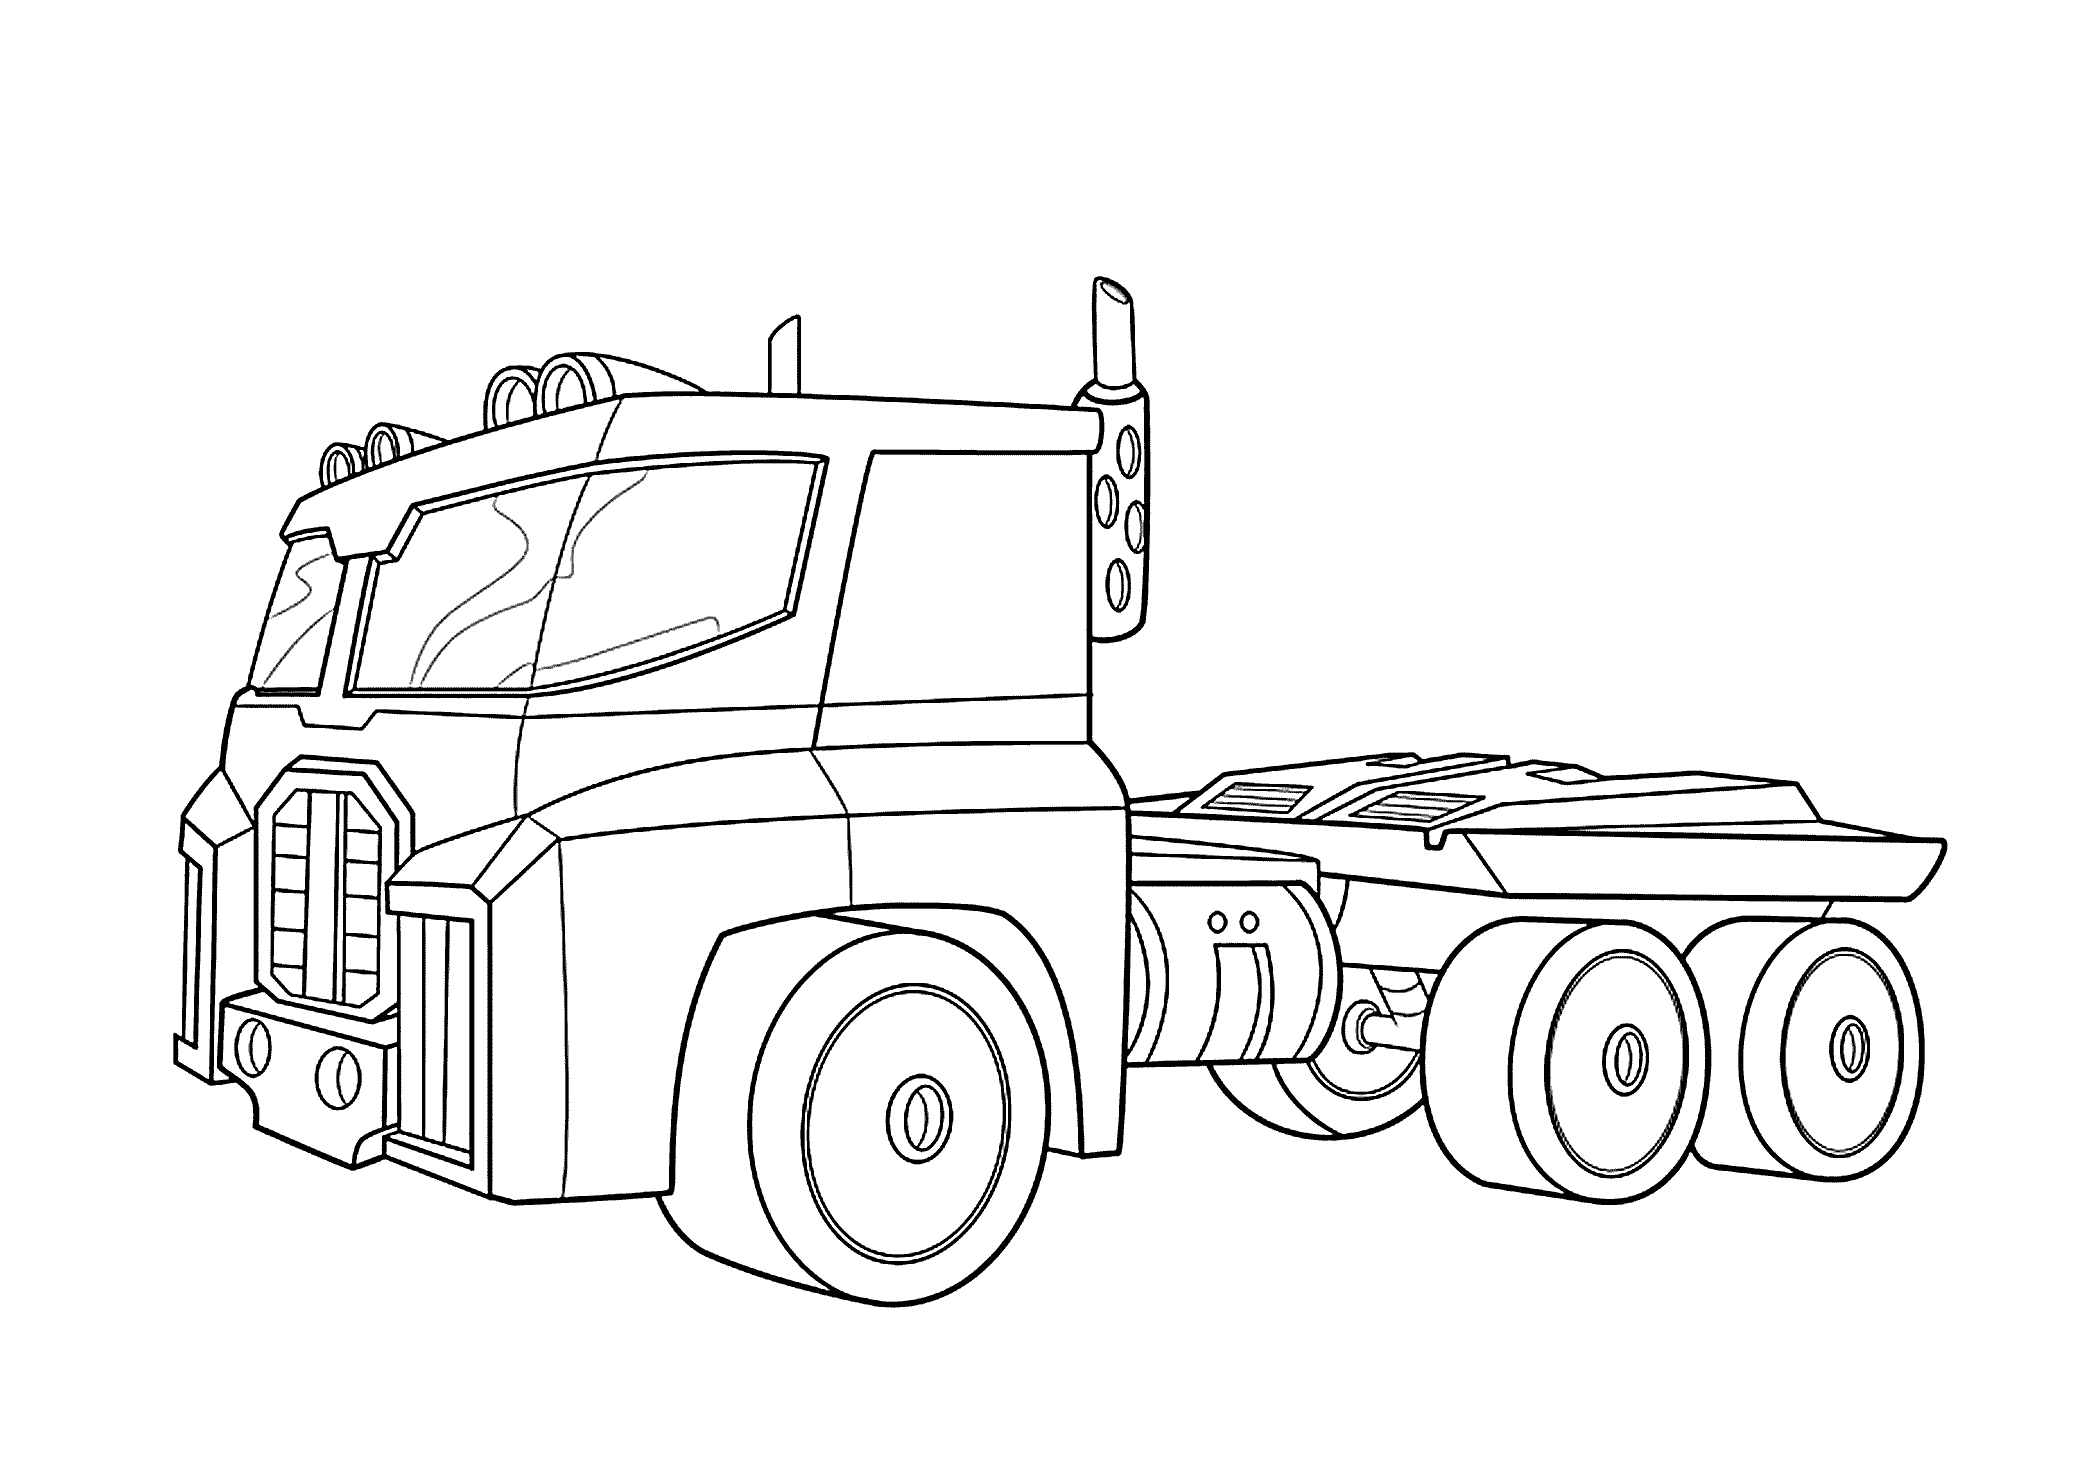 Transformers Coloring Pages TV Film Transformer Rescue Bots Printable 2020 10589 Coloring4free